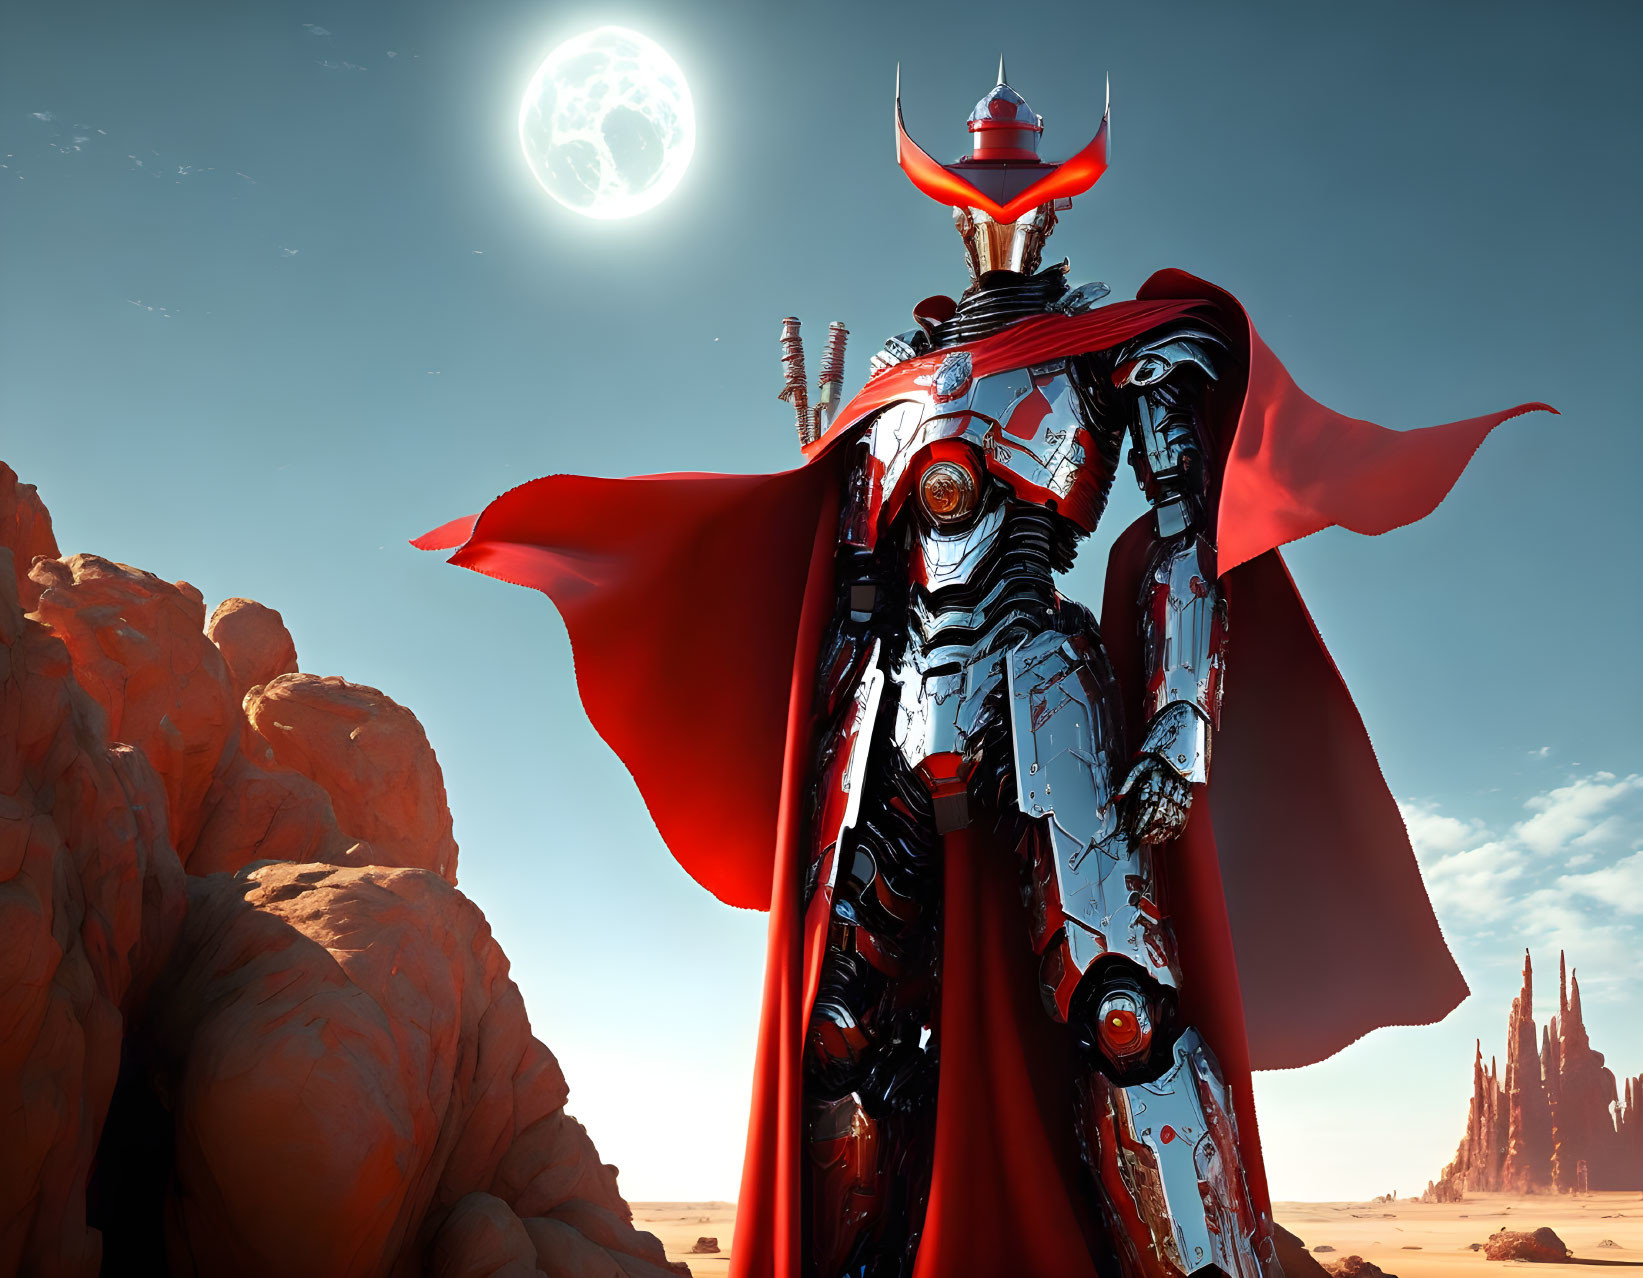 Robotic figure in red cape in desert landscape with moon and rocky formations